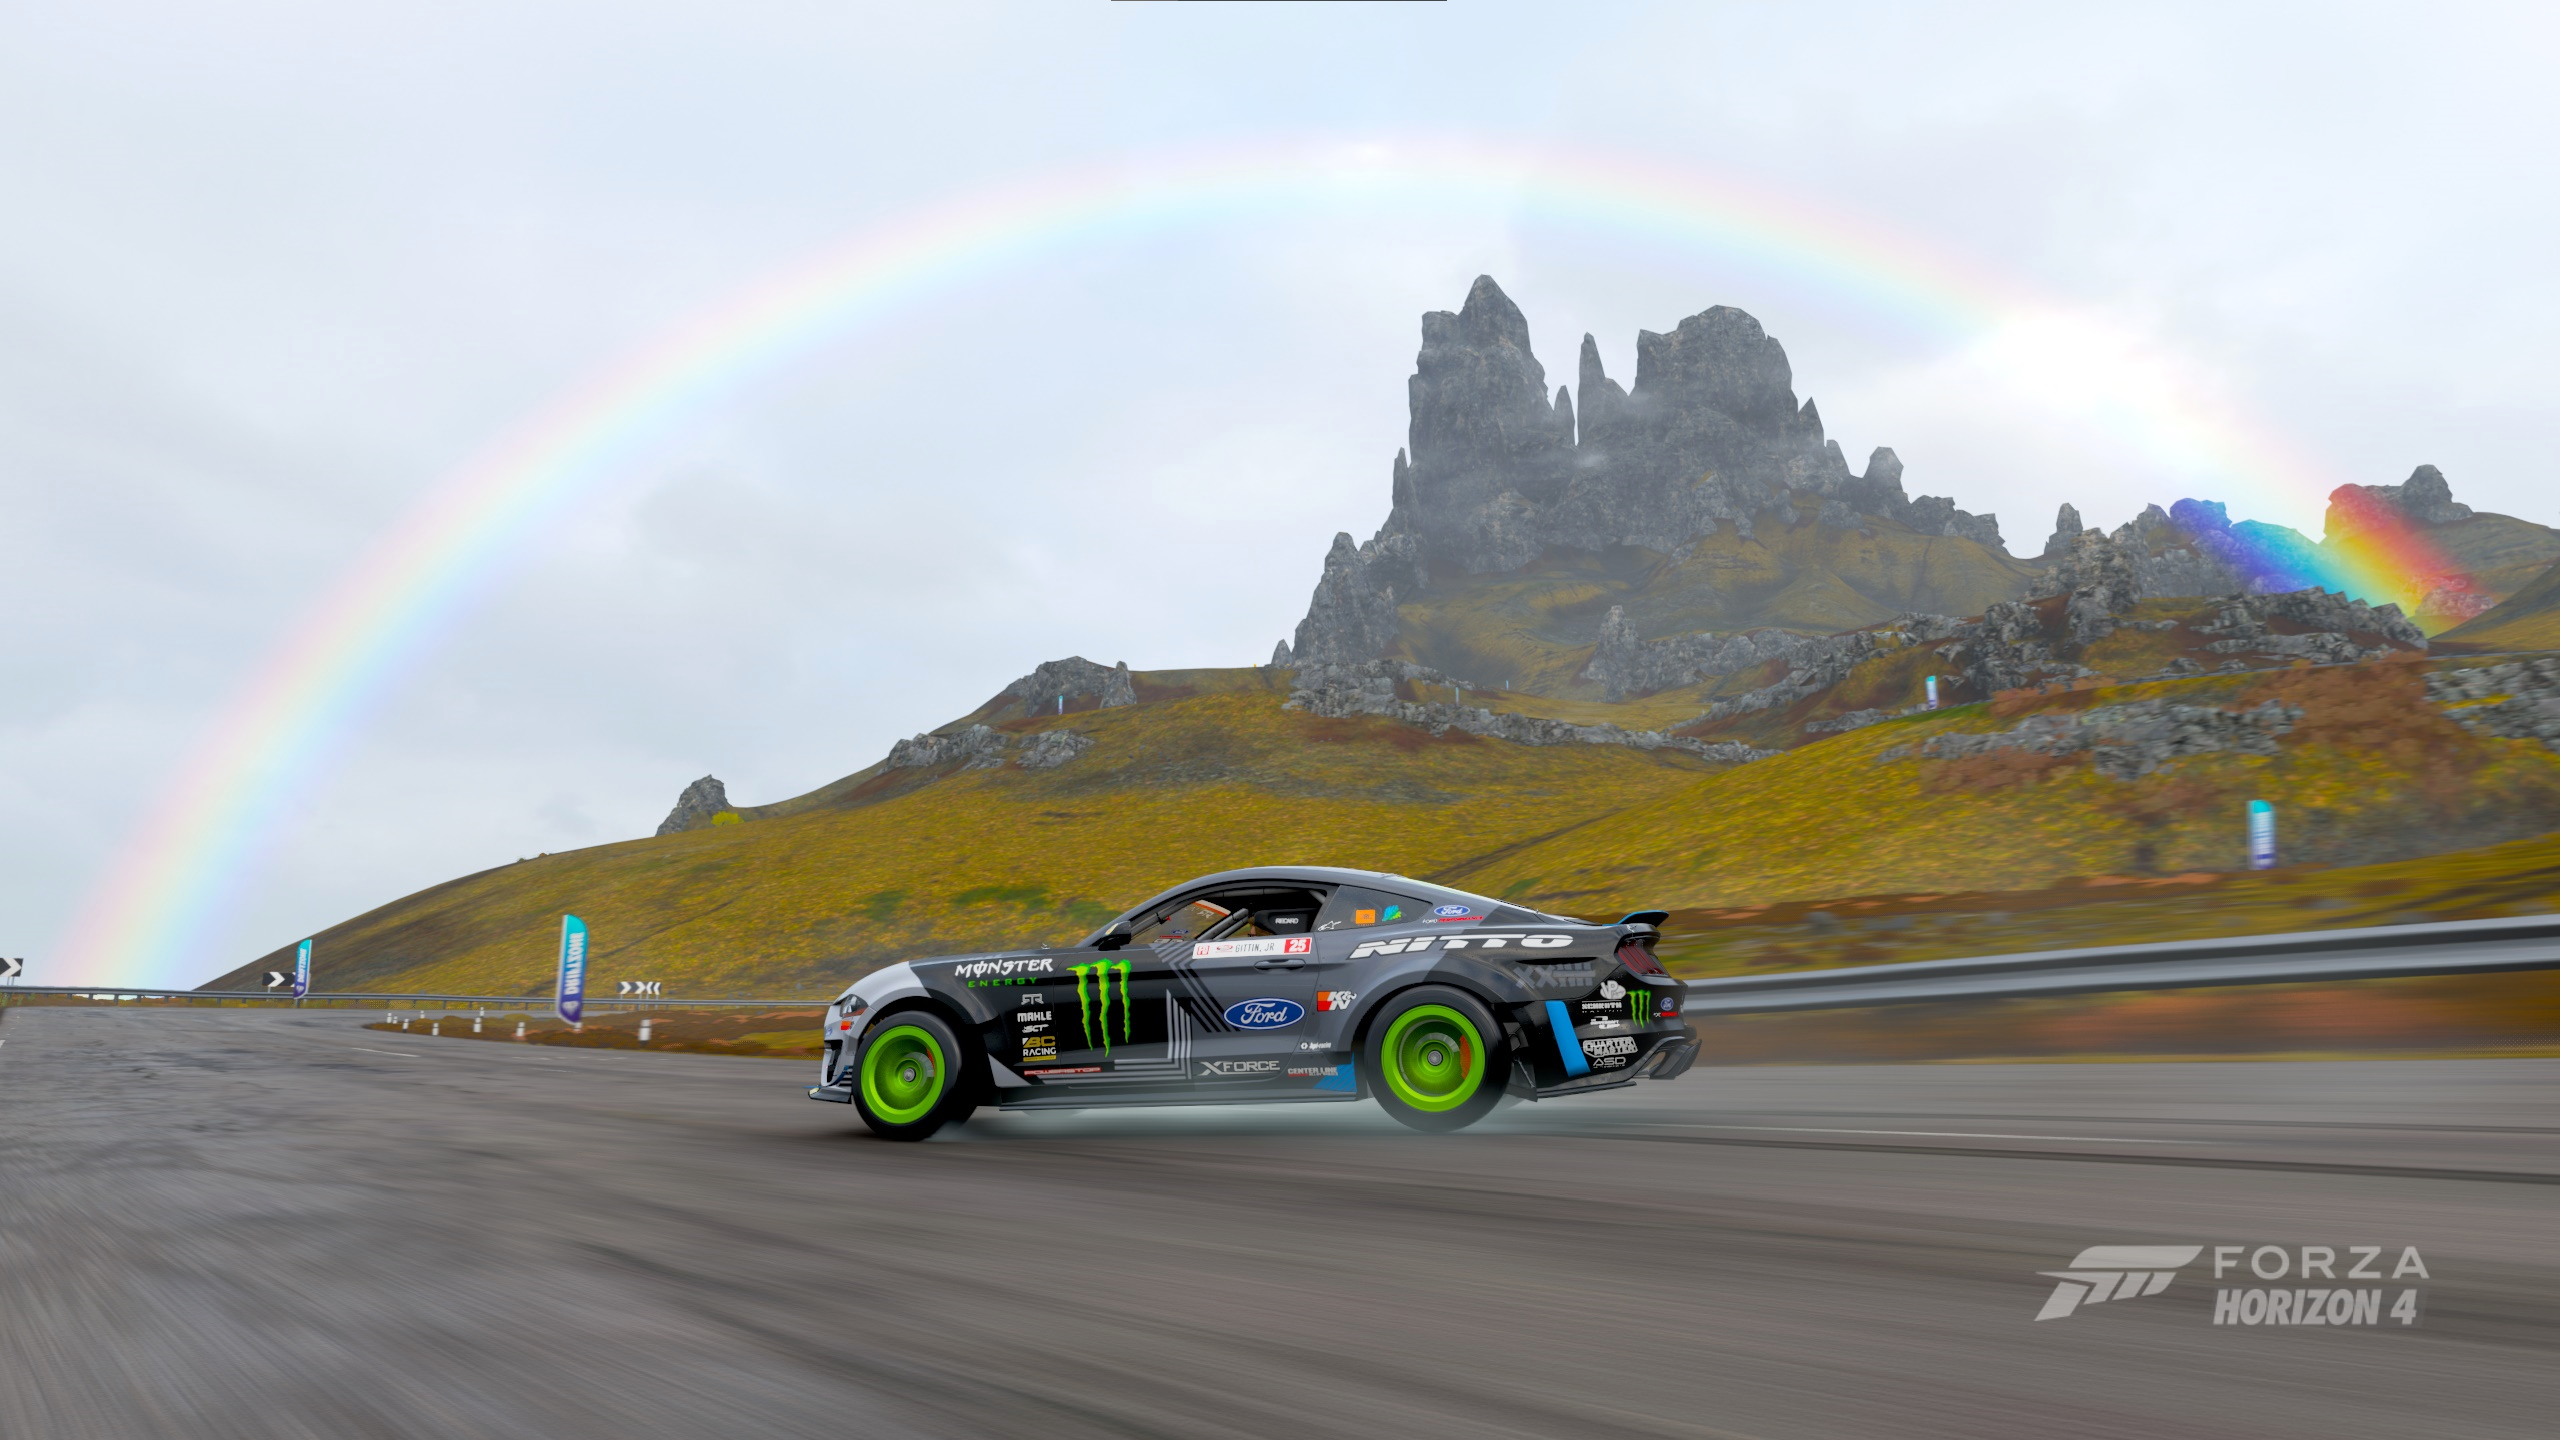 Forza Horizon 4 Car Ford Ford Mustang Muscle Cars American Cars Livery V8 Engine Turn 10 Studios Pla 2560x1440